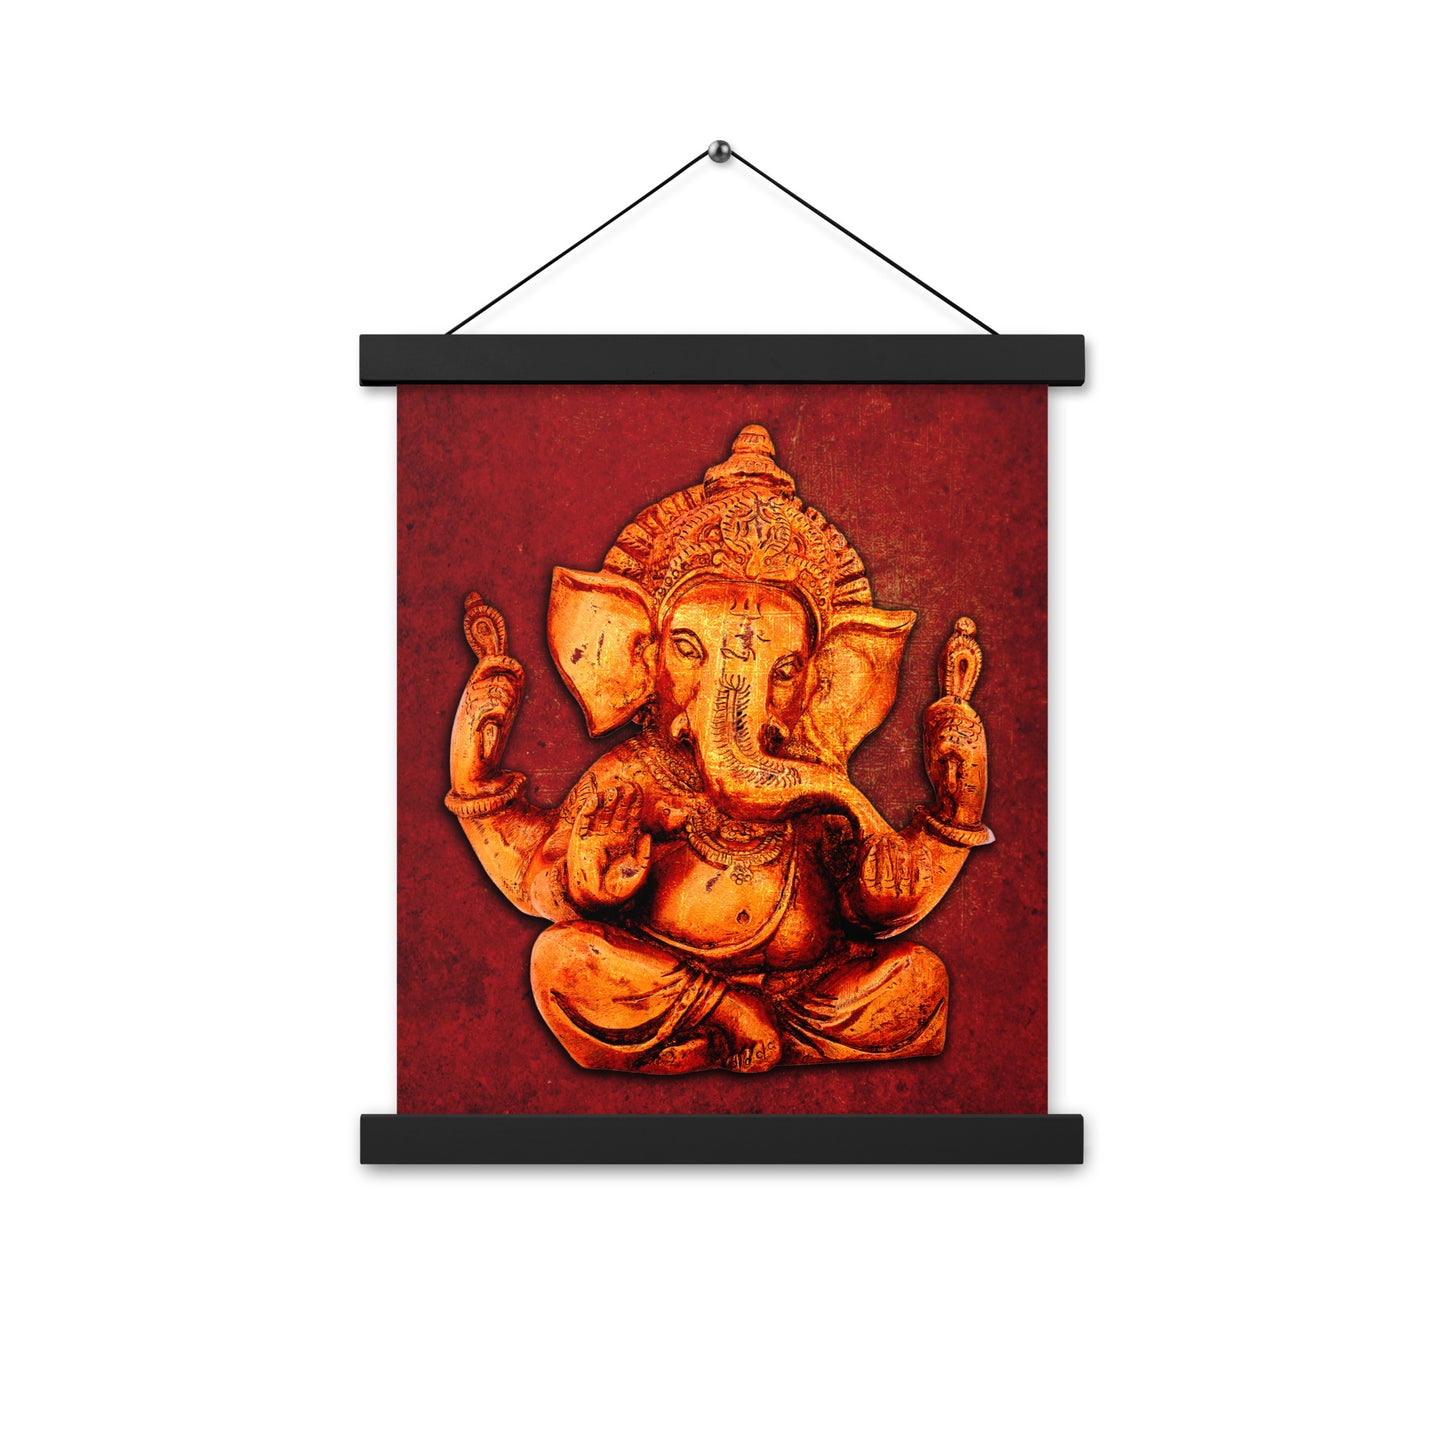 Wall Art Golden Ganesha on a Distressed Lava Red Background Printed on Archival Paper with Magnetic Wood Hangers 11x14